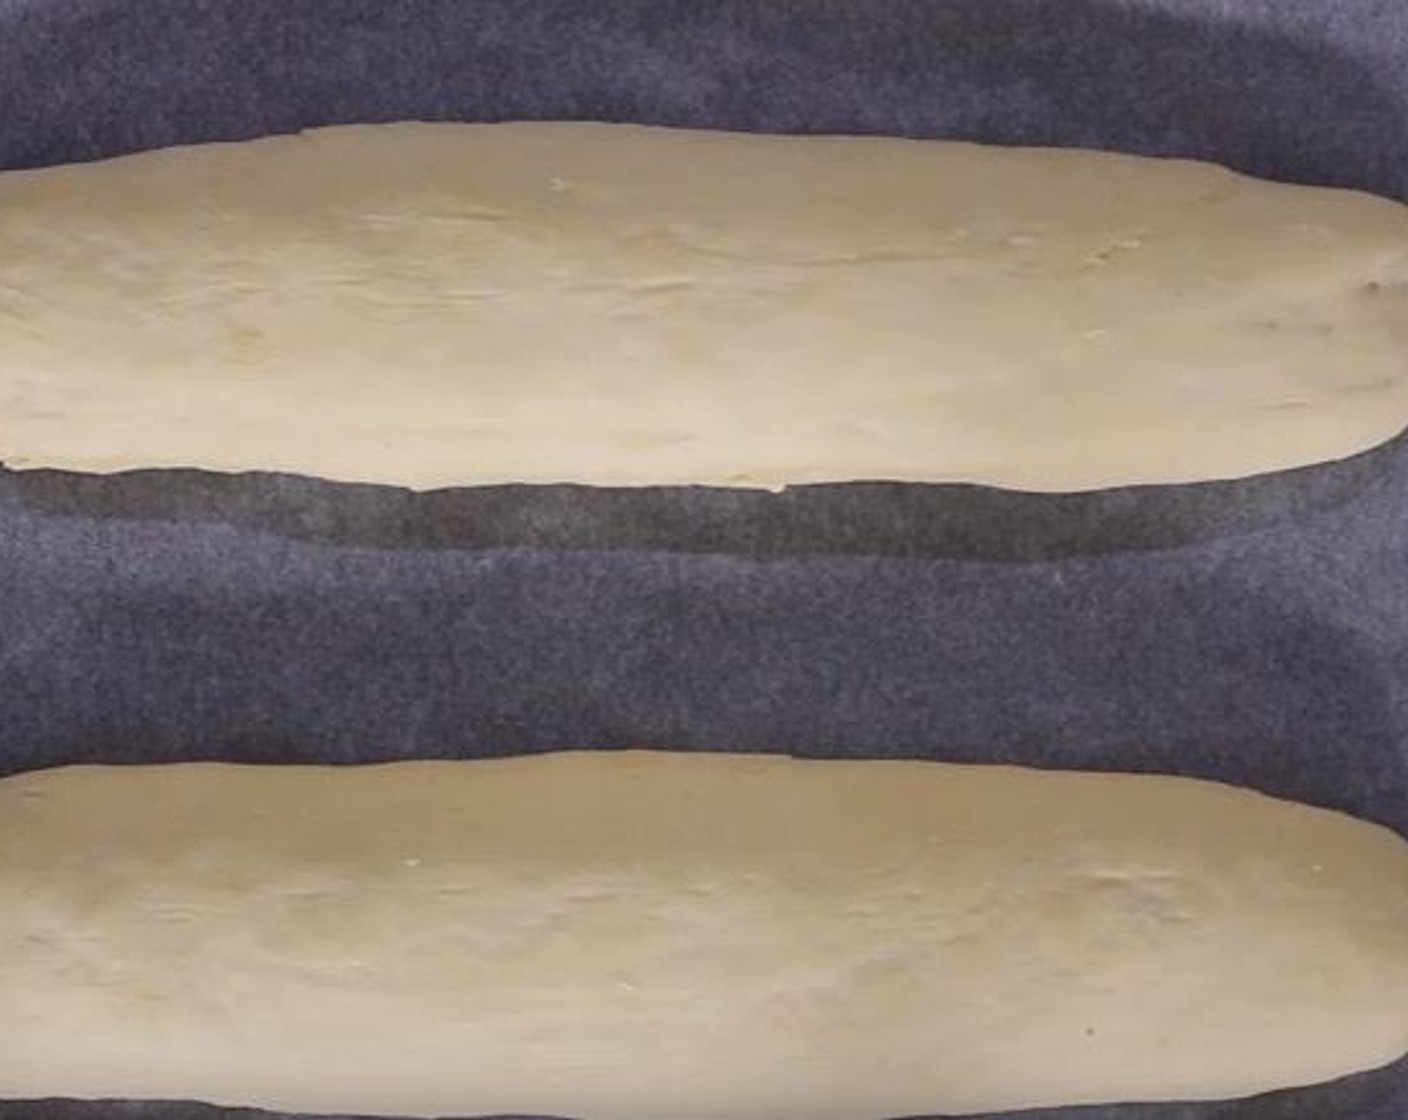 step 7 Transfer the loaves to a tray lined with baking paper. Cover and let rest for 1 hour.